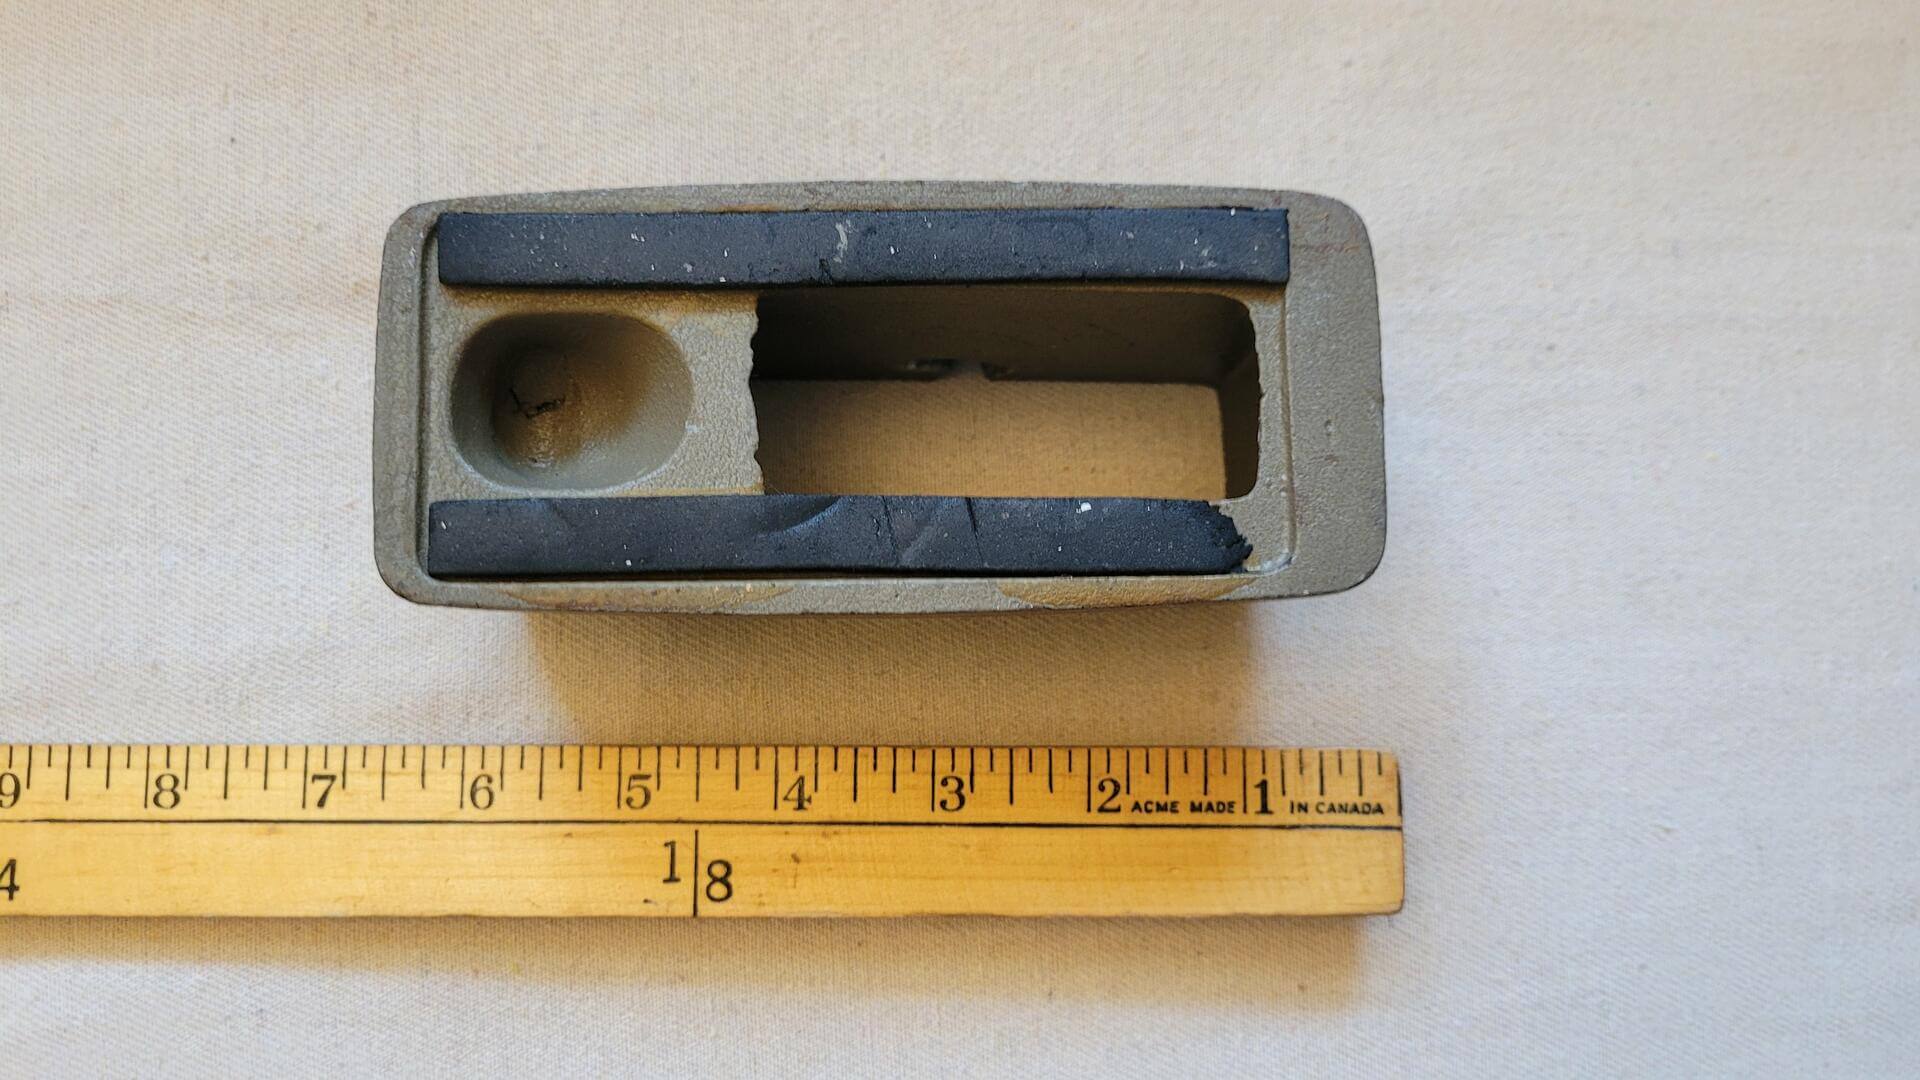 sellotape-mid-century-1950s-cast-iron-steel-tape-dispenser-antique-vintage-made-in-england-collectible-retro-office-tools-and-equipment-top-view